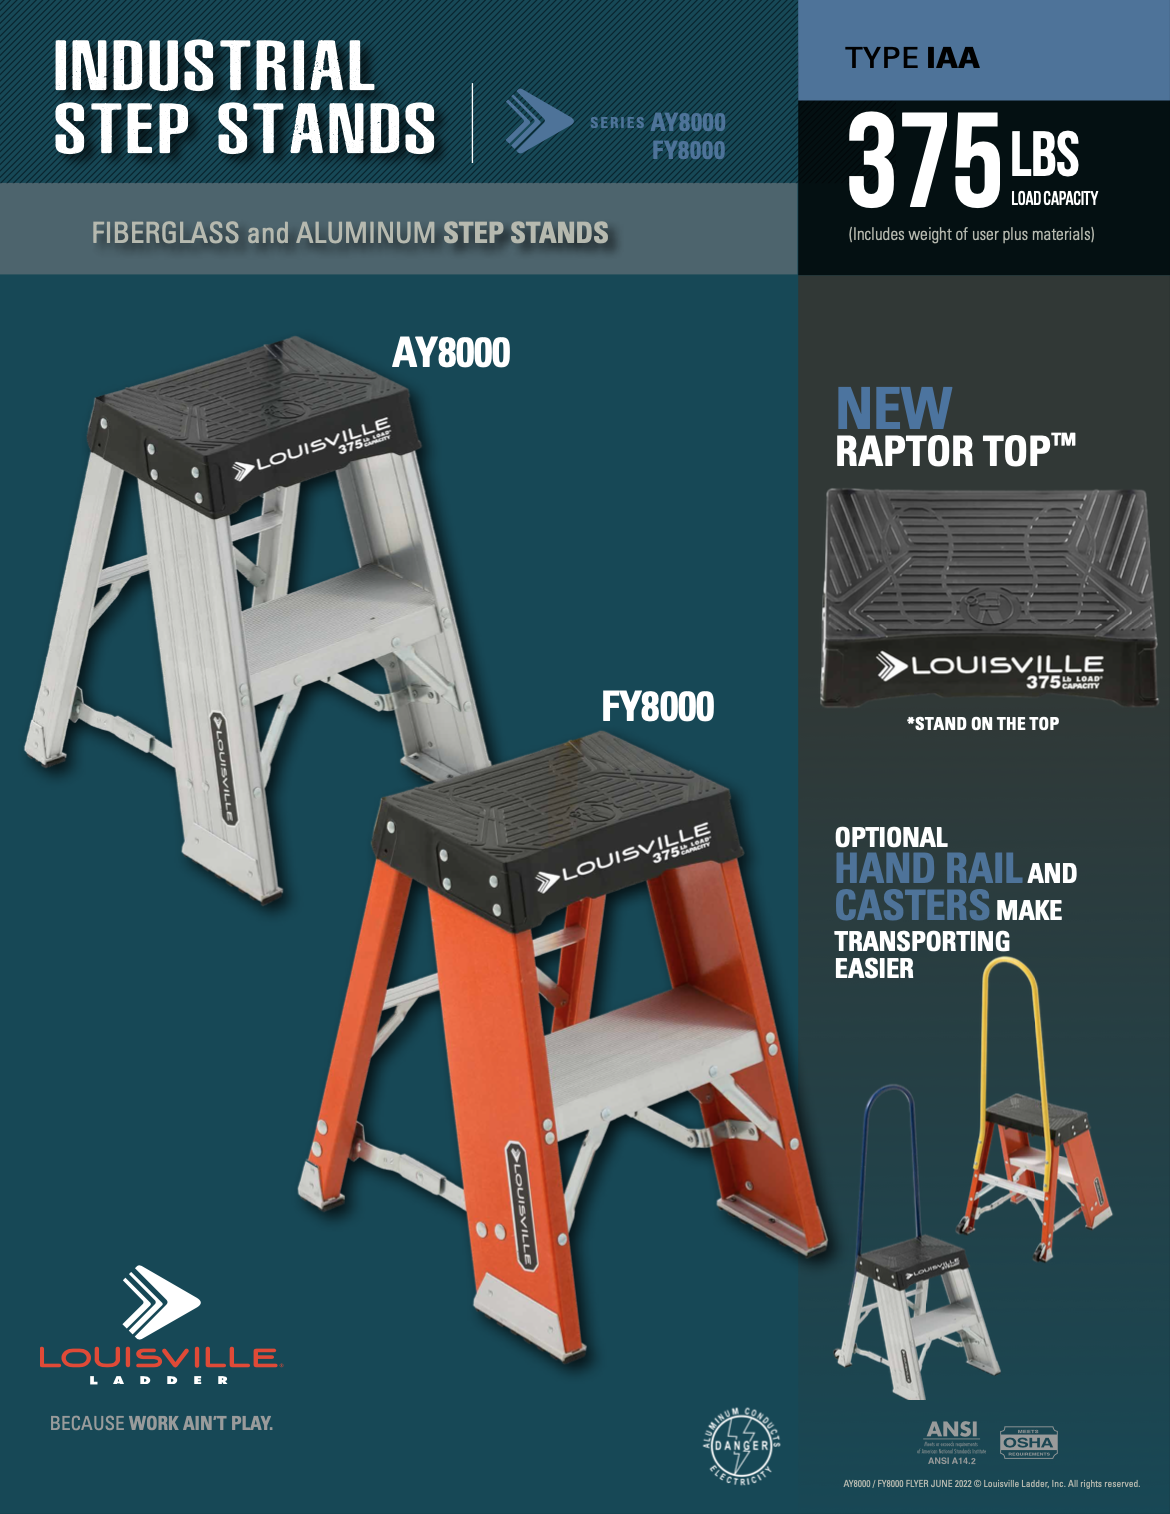 AY8000 and FY8000 Industrial Step Stands Marketing Material Image